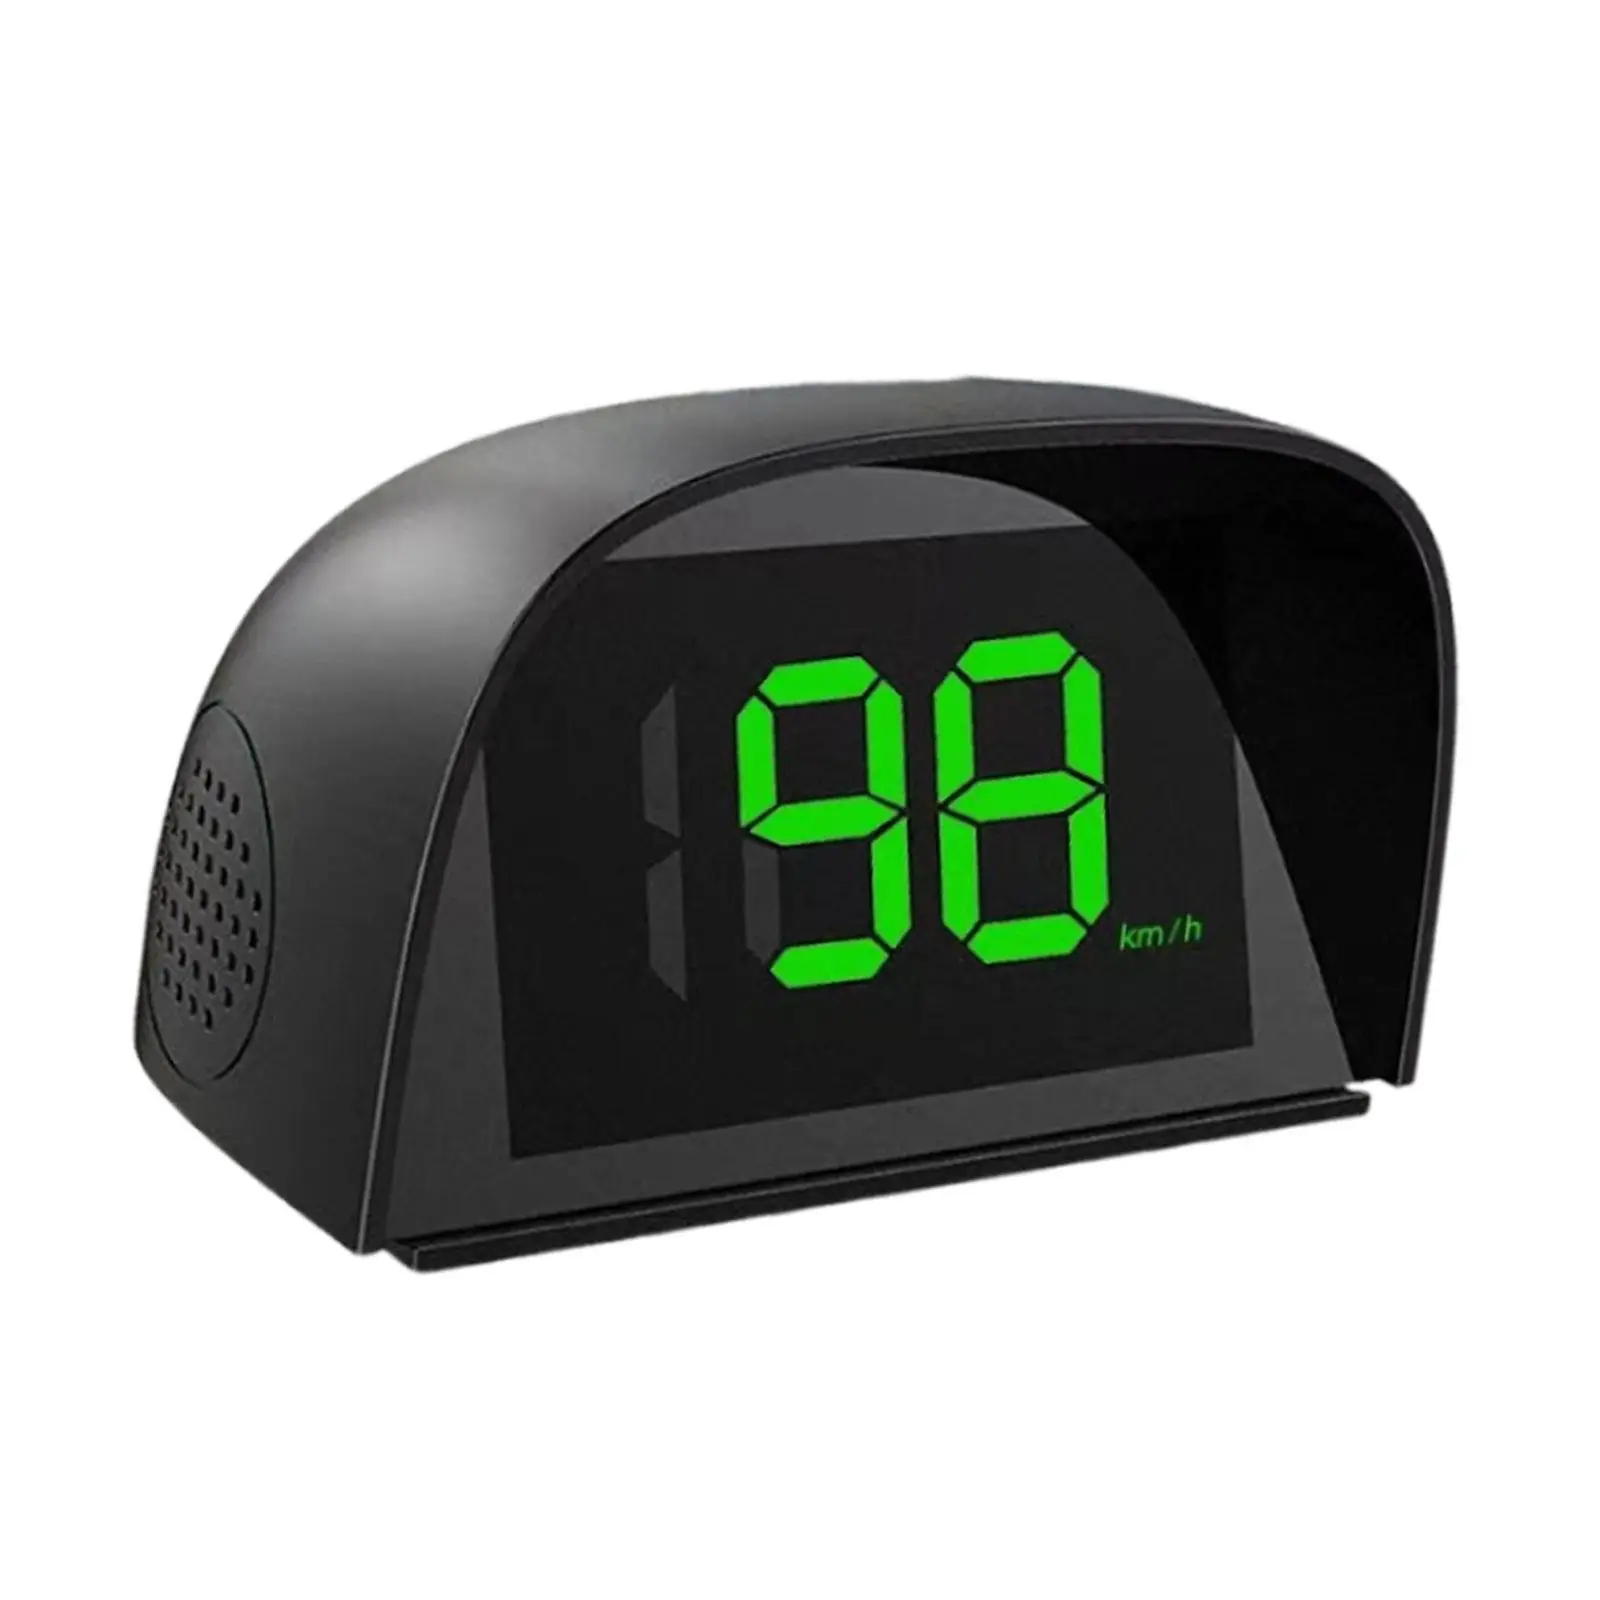 Car HUD Head up Display Portable Driving Speed Display for SUV Bus Trucks